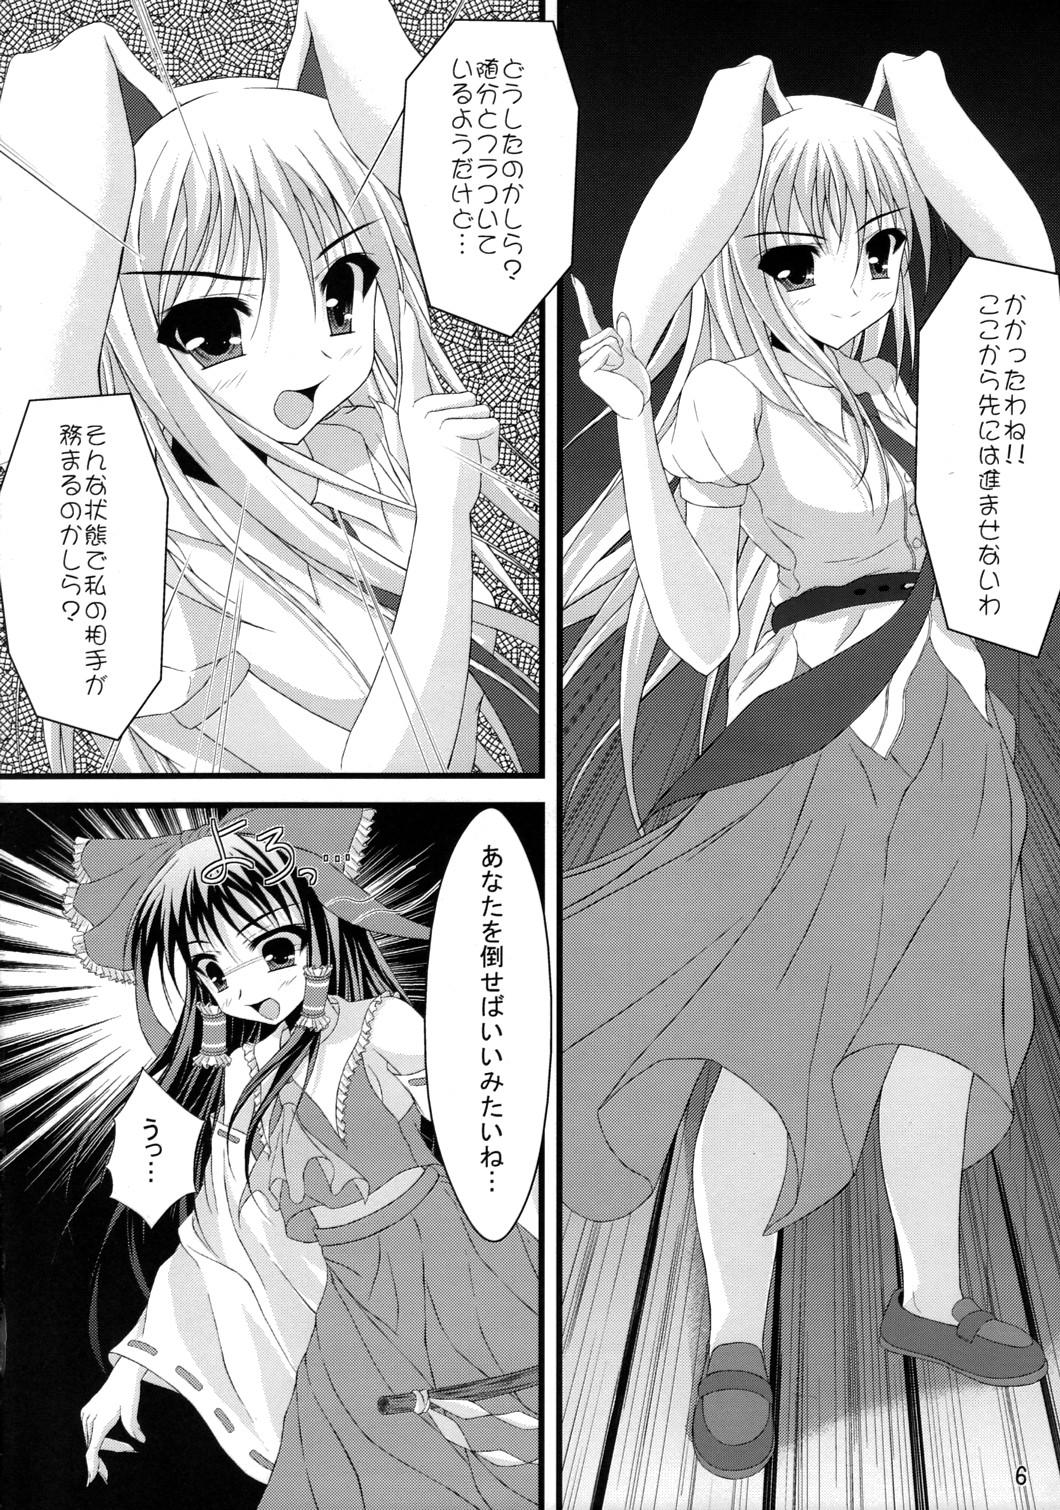 Women Sucking Dick Tele-Mesmerism - Touhou project Ikillitts - Page 5